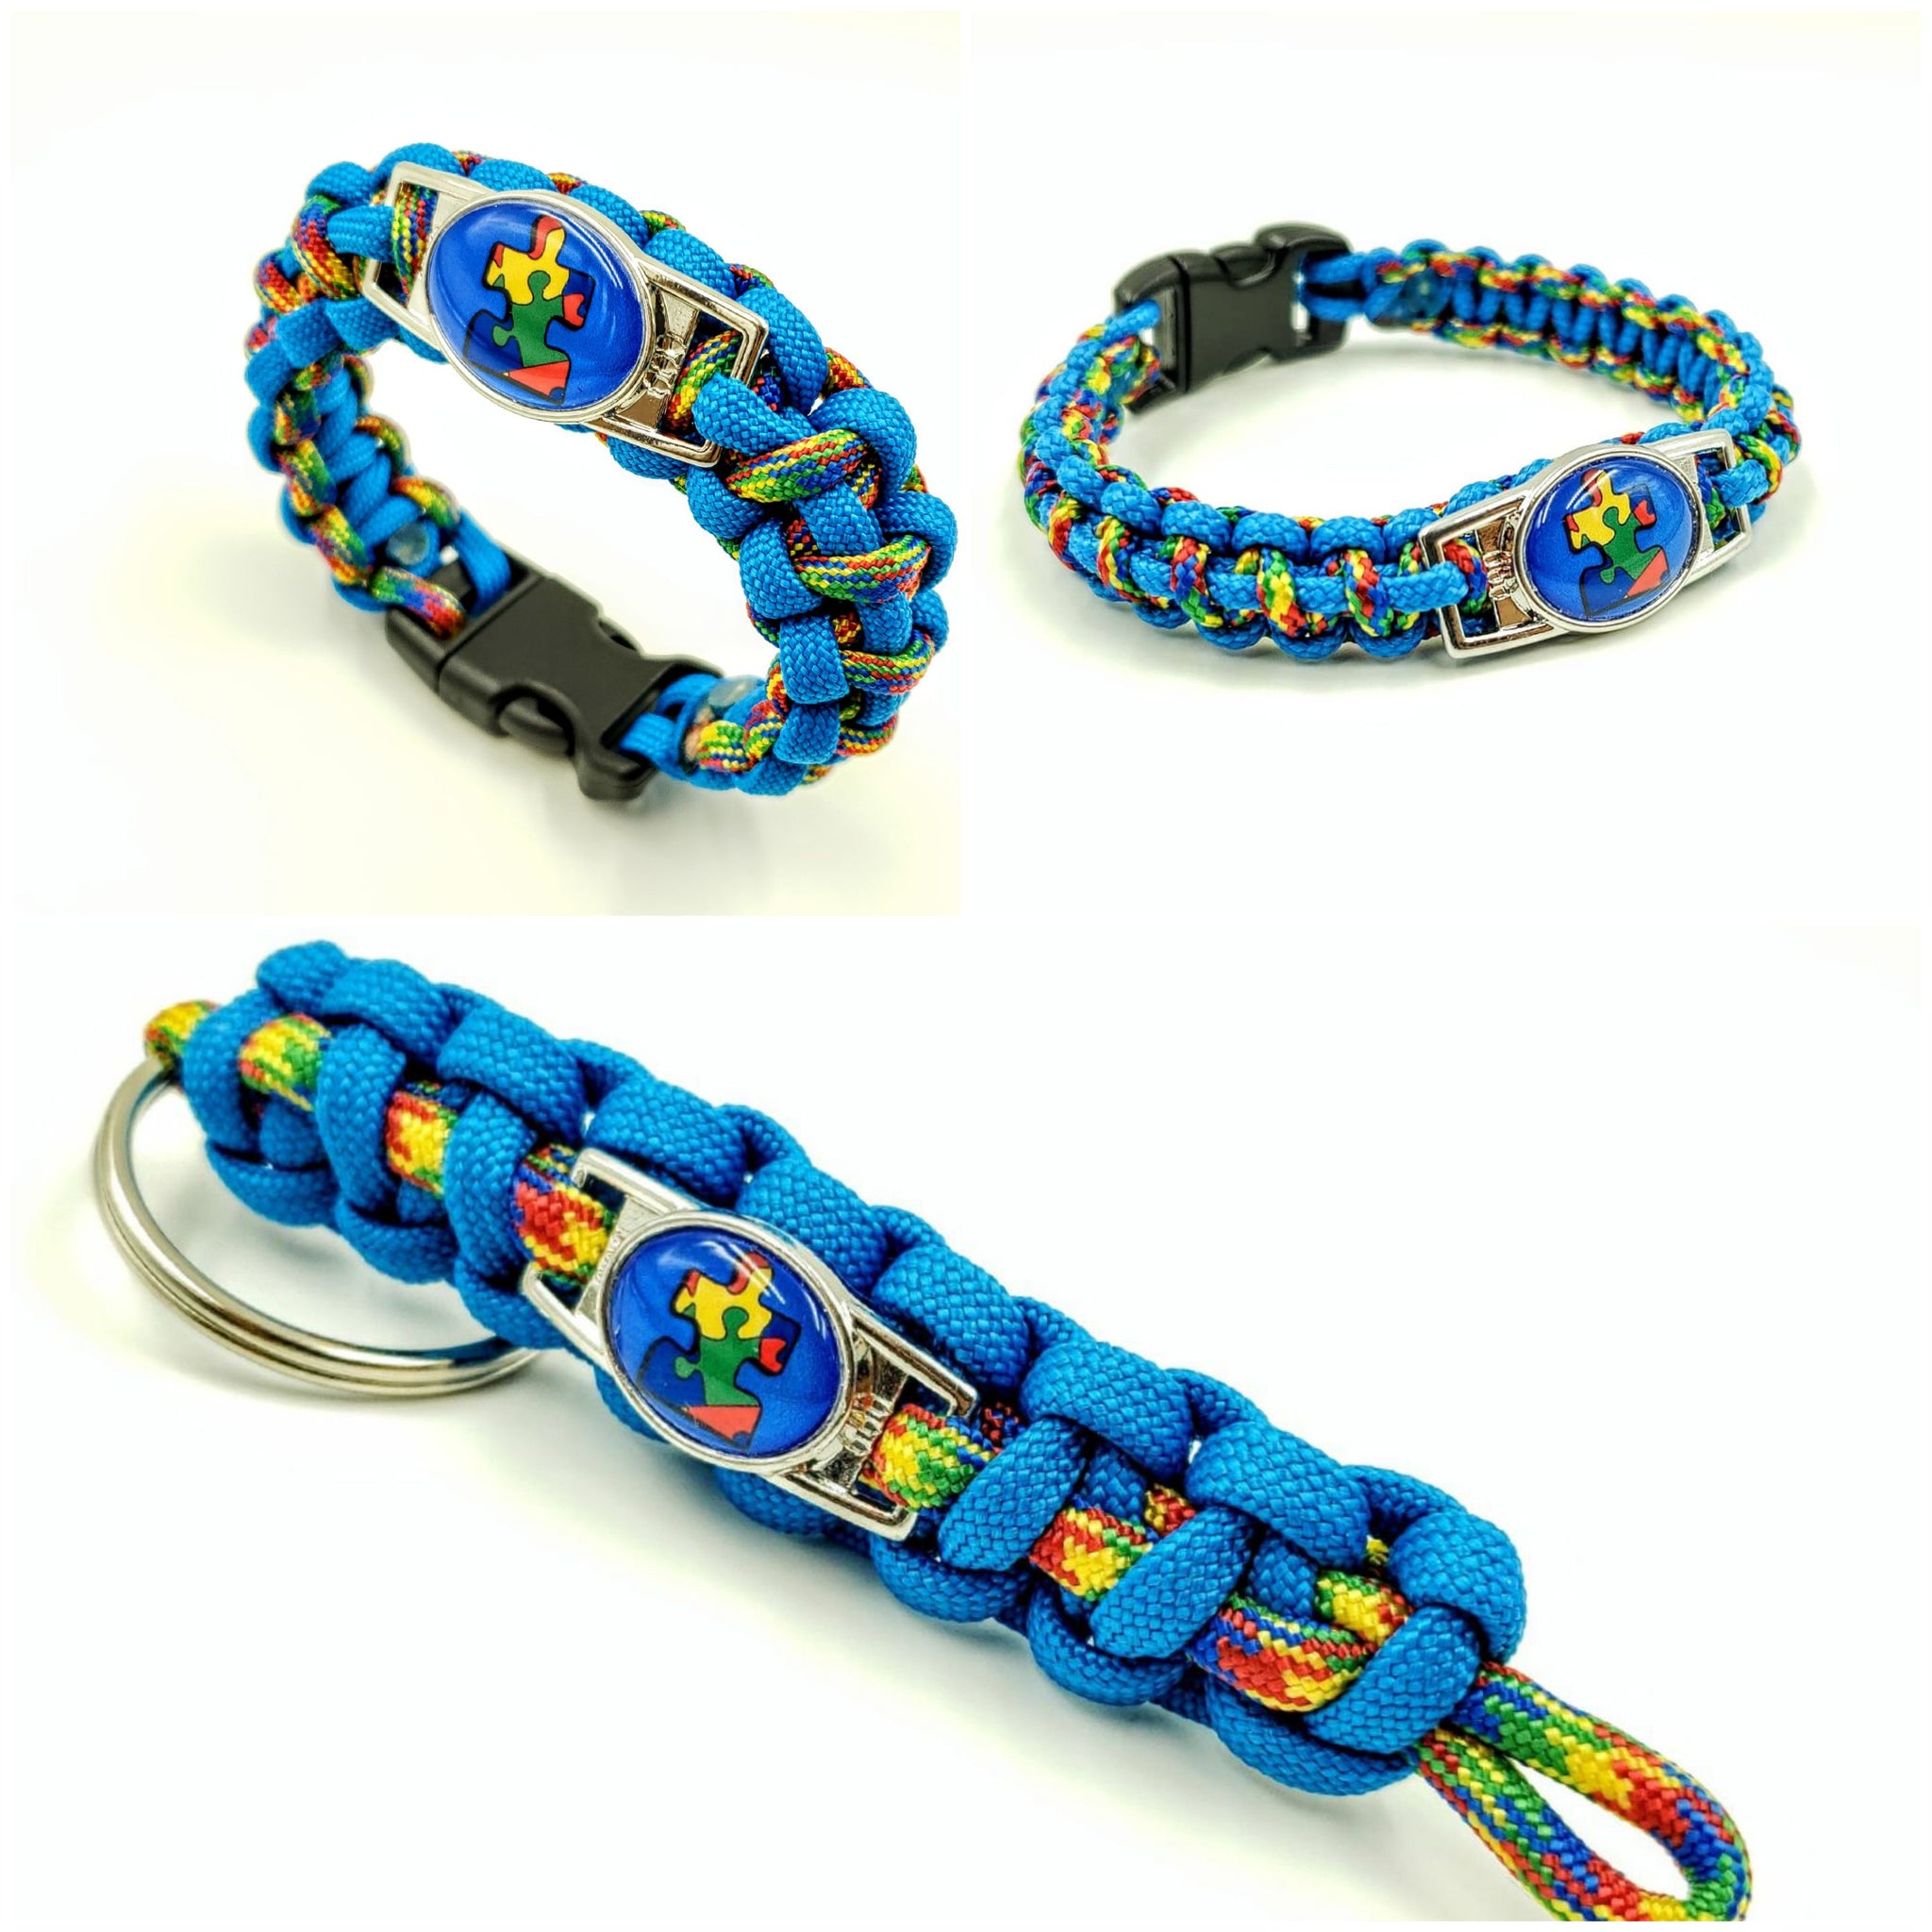 4 Pack) I Have Autism Awareness Bracelets Wristbands Kids Teens Adults ASD  (Small (15cm)) : Amazon.co.uk: Stationery & Office Supplies